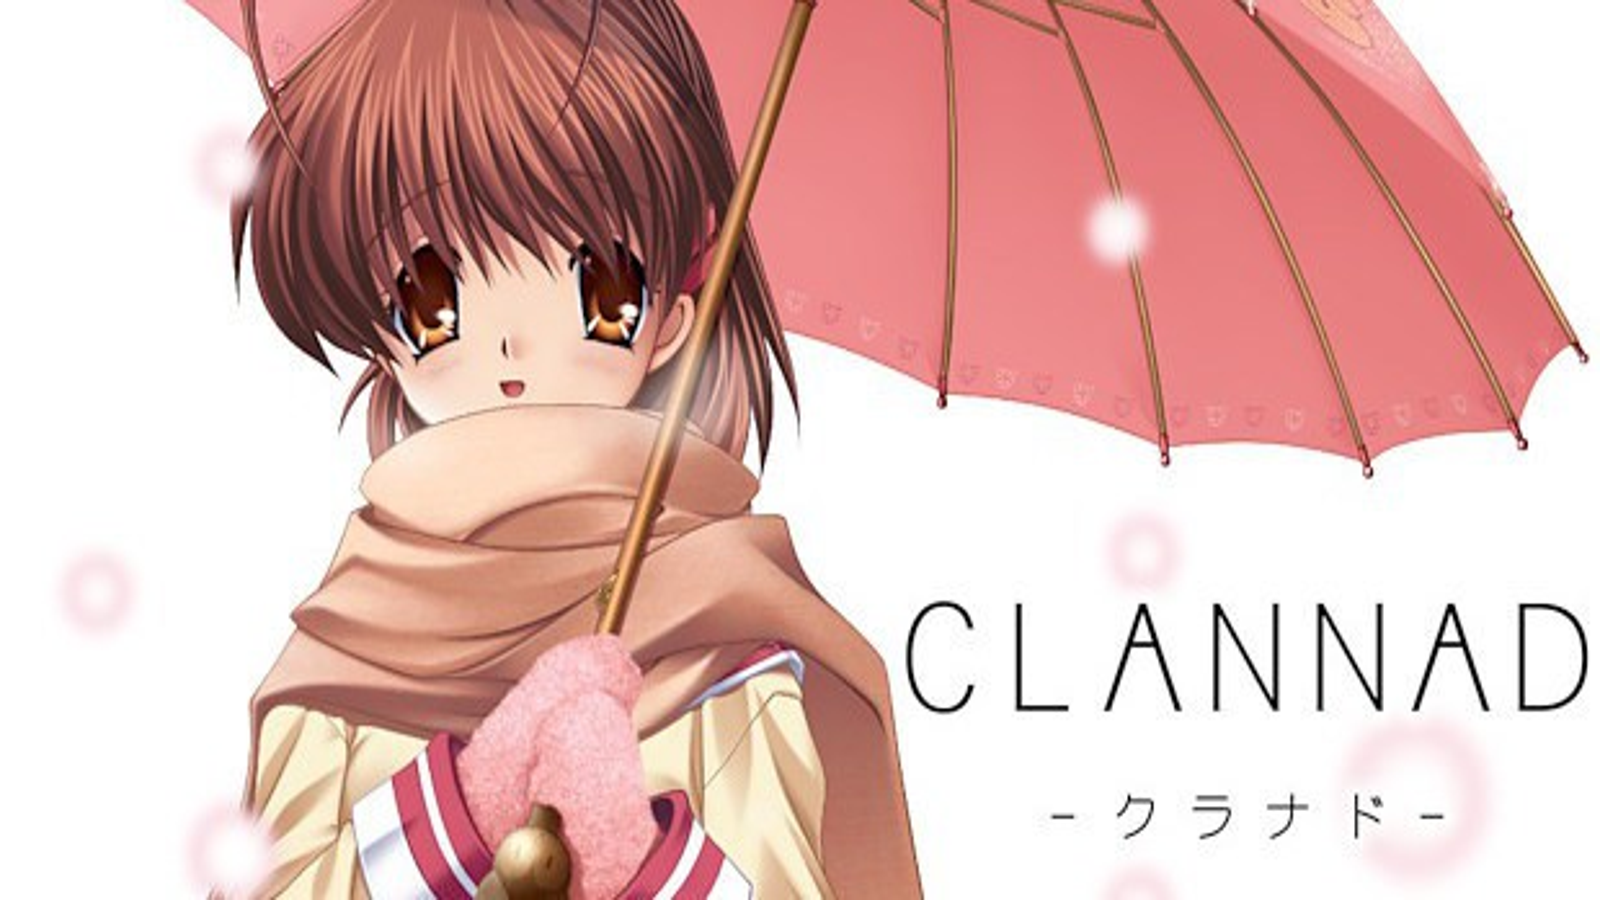 Why Clannad is still a fan favorite, decades after its release?